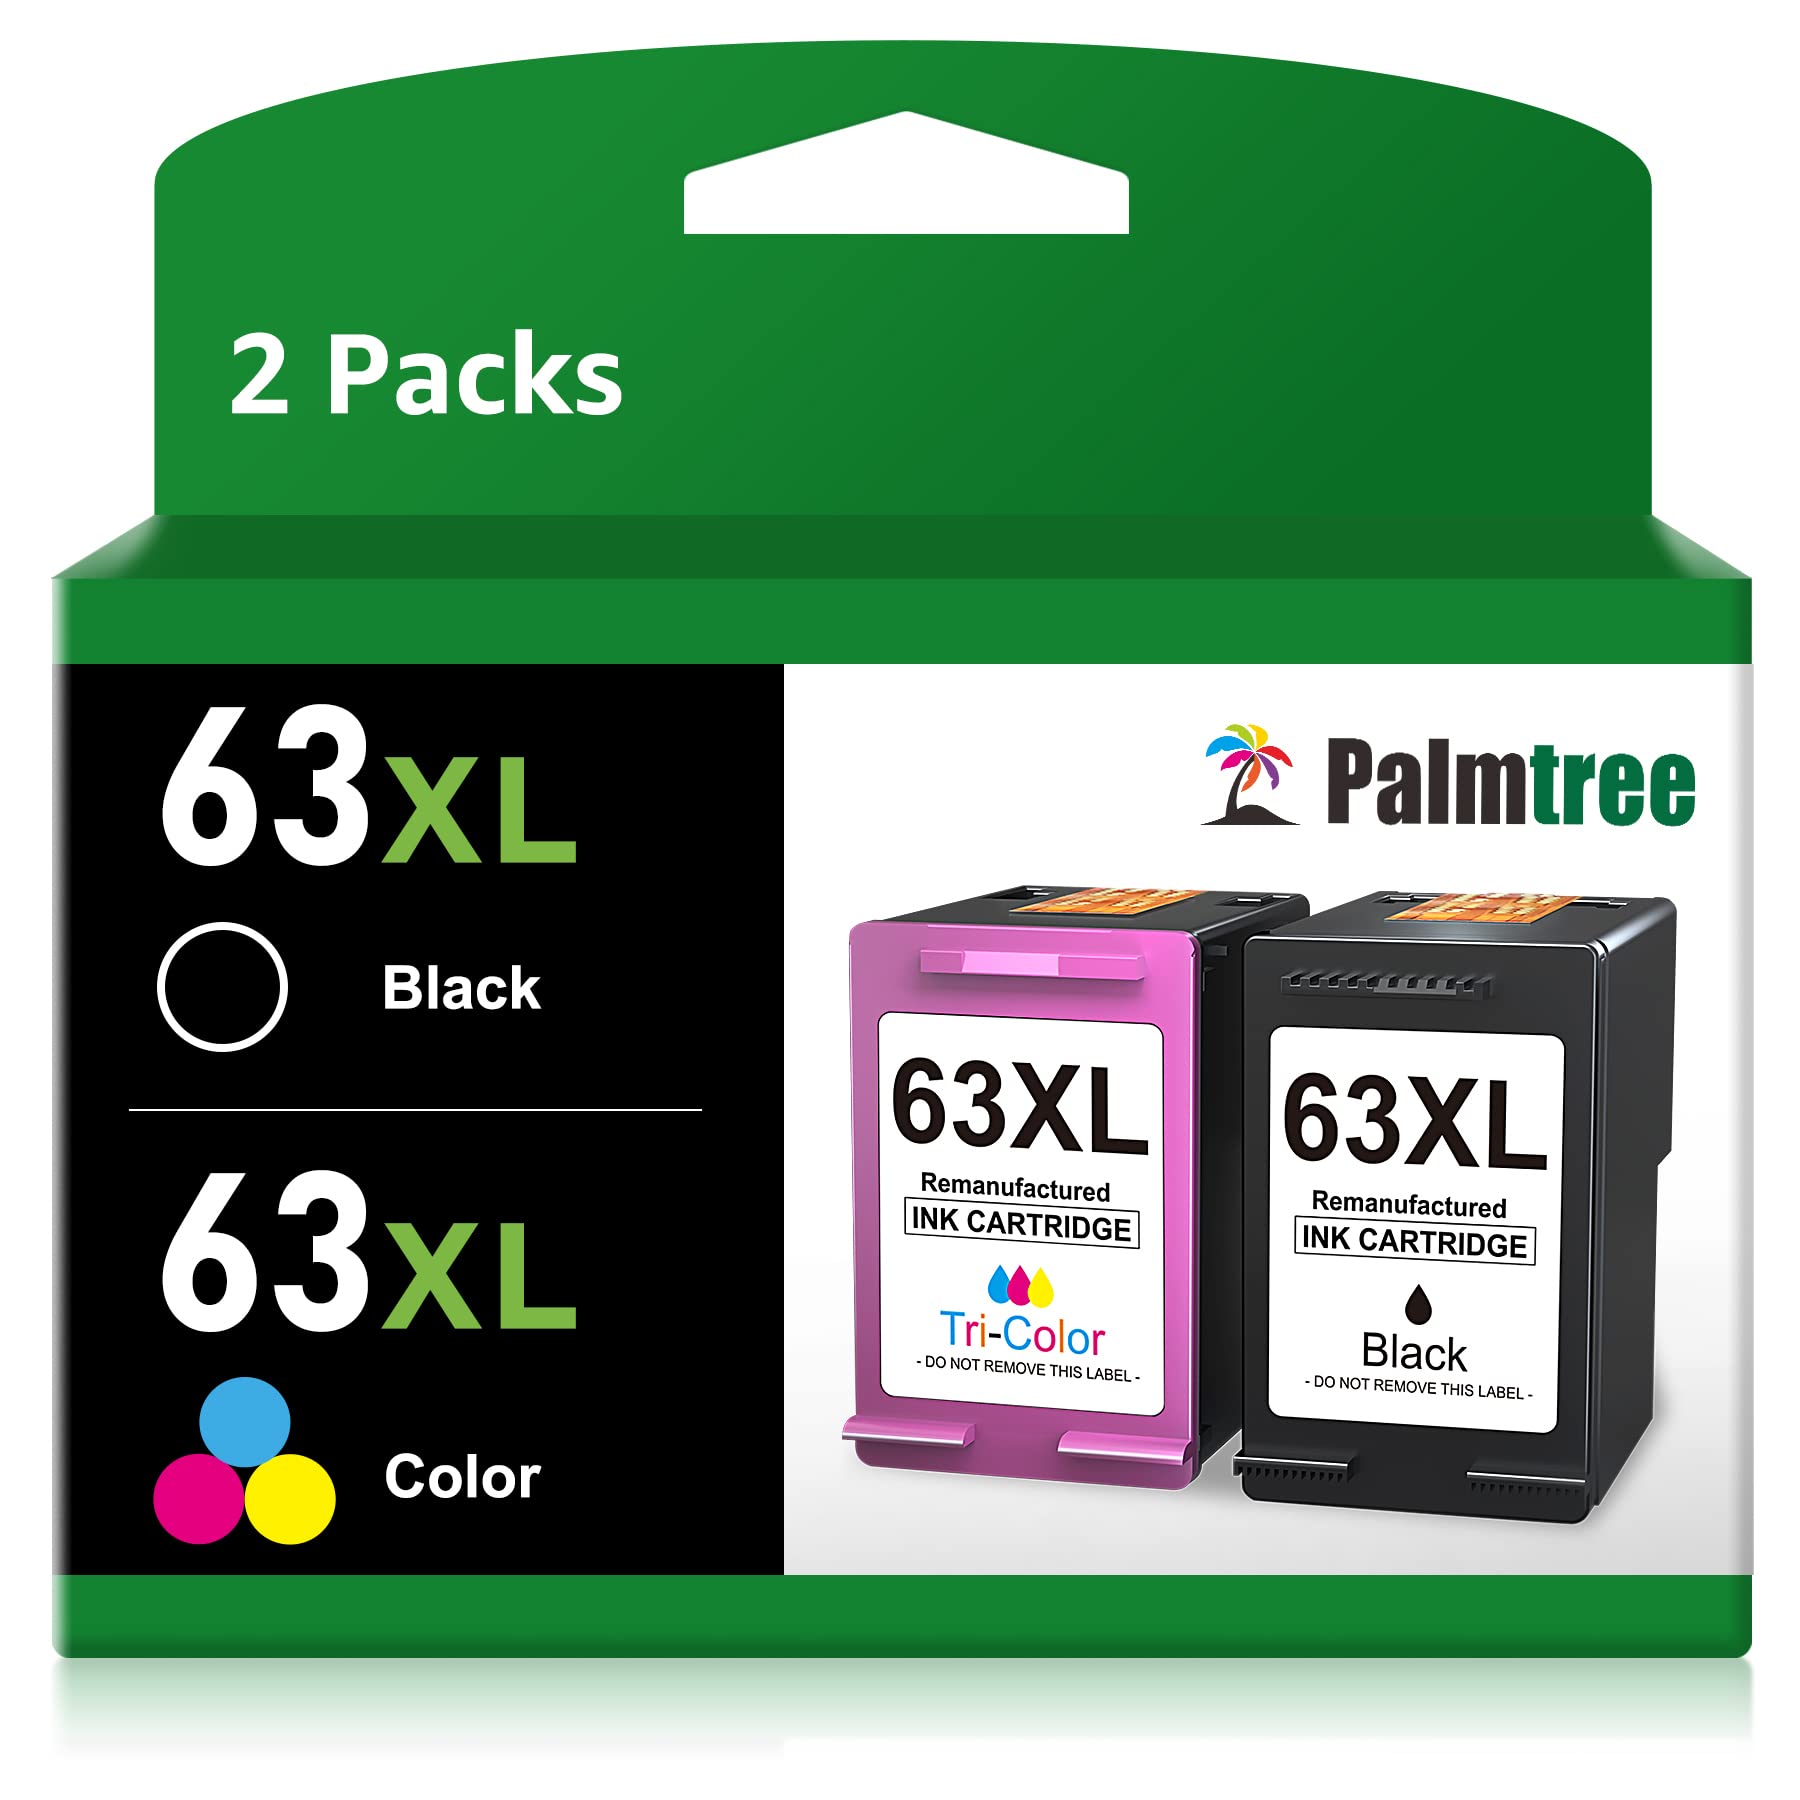 Non-original and incompatible ink cartridges